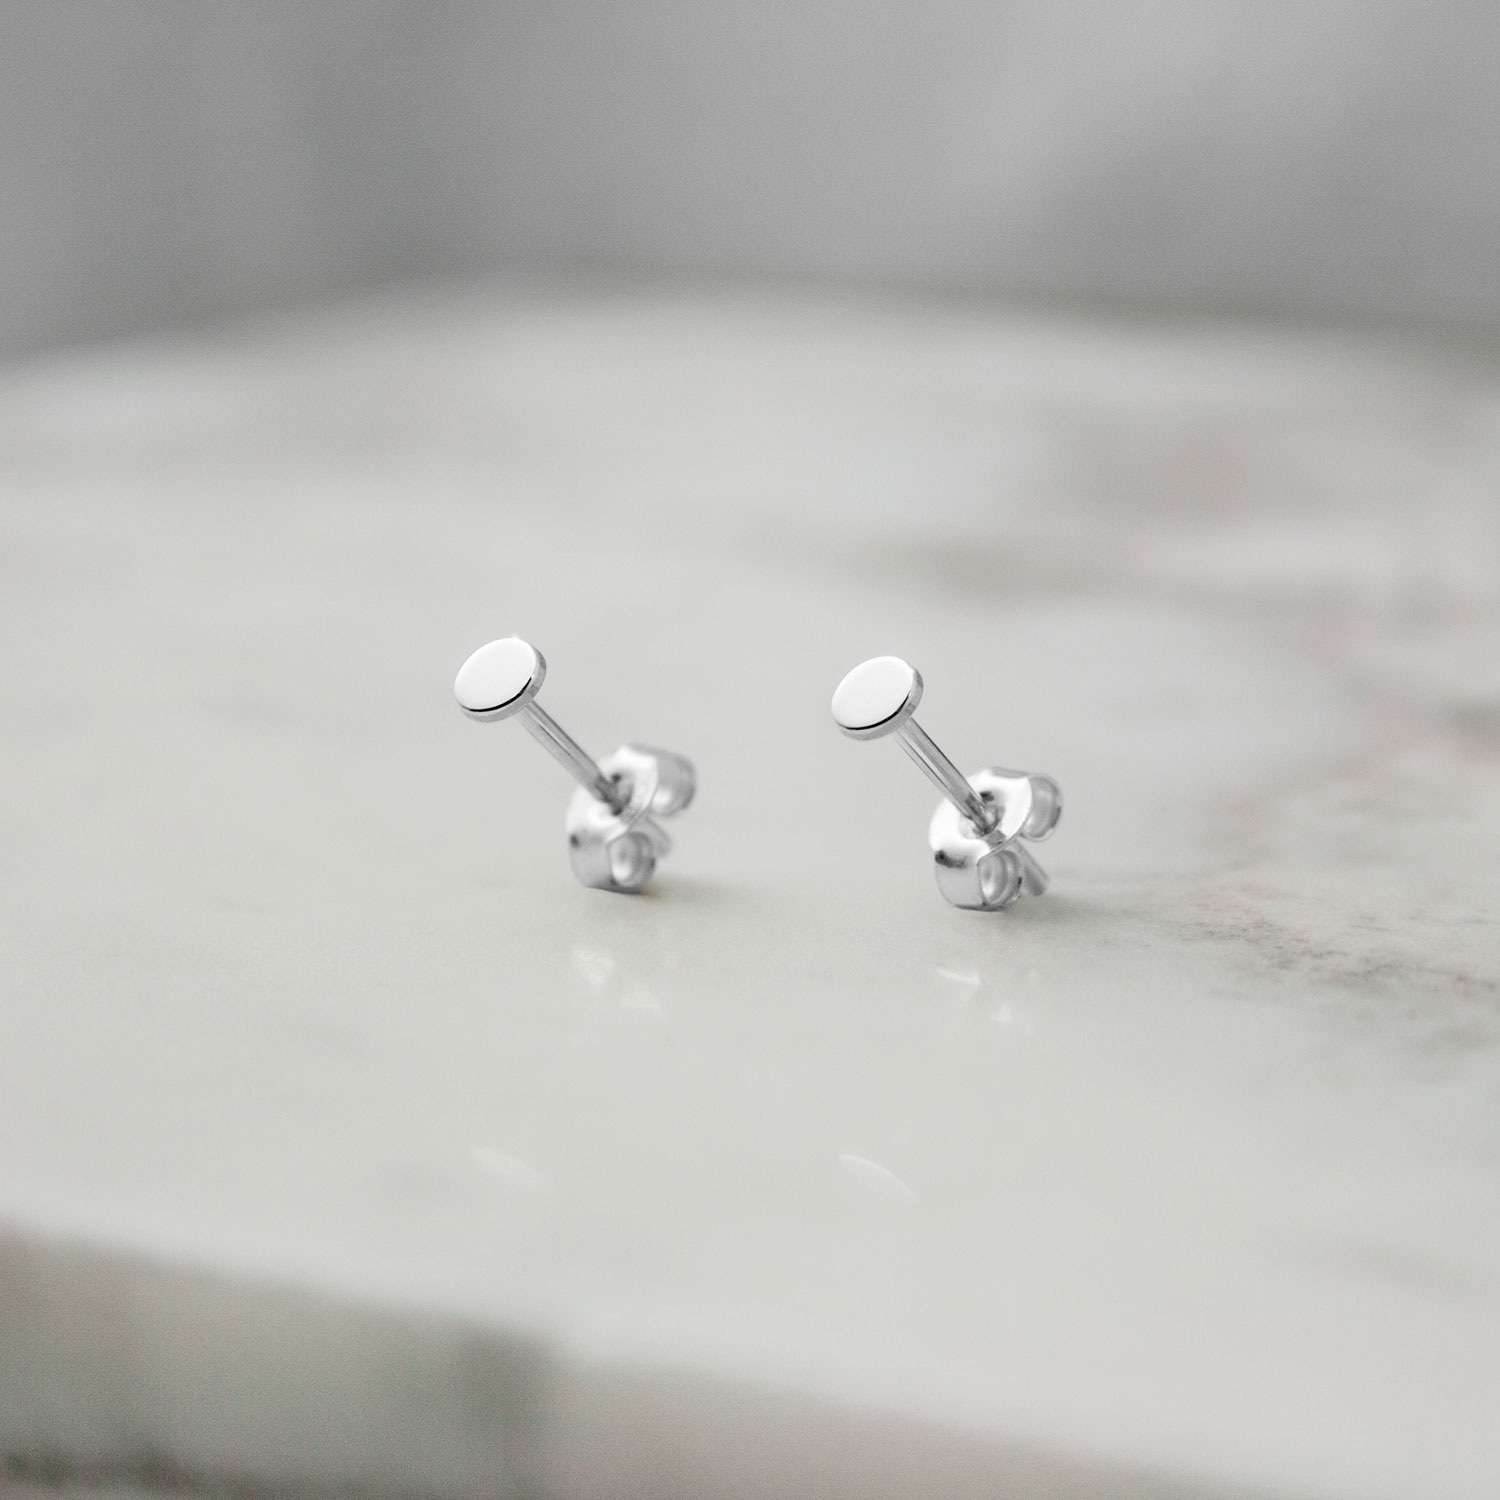 Sterling Silver Stud Earrings With Tiny Star Design | Lucy Ashton Jewellery  | SilkFred US